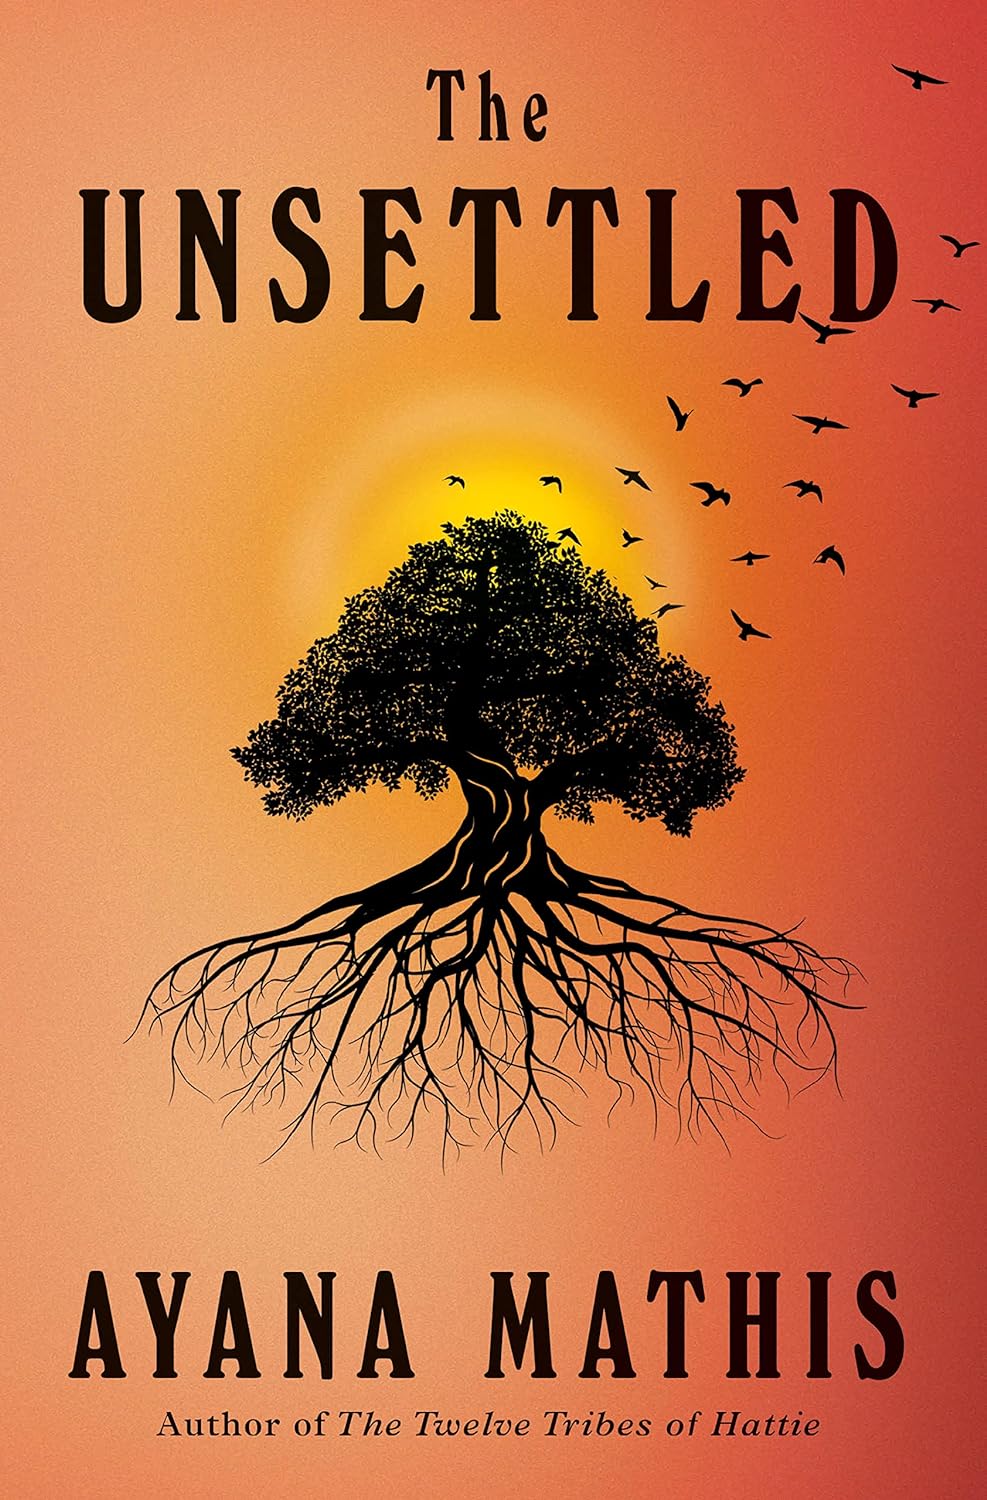 Image for "The Unsettled"